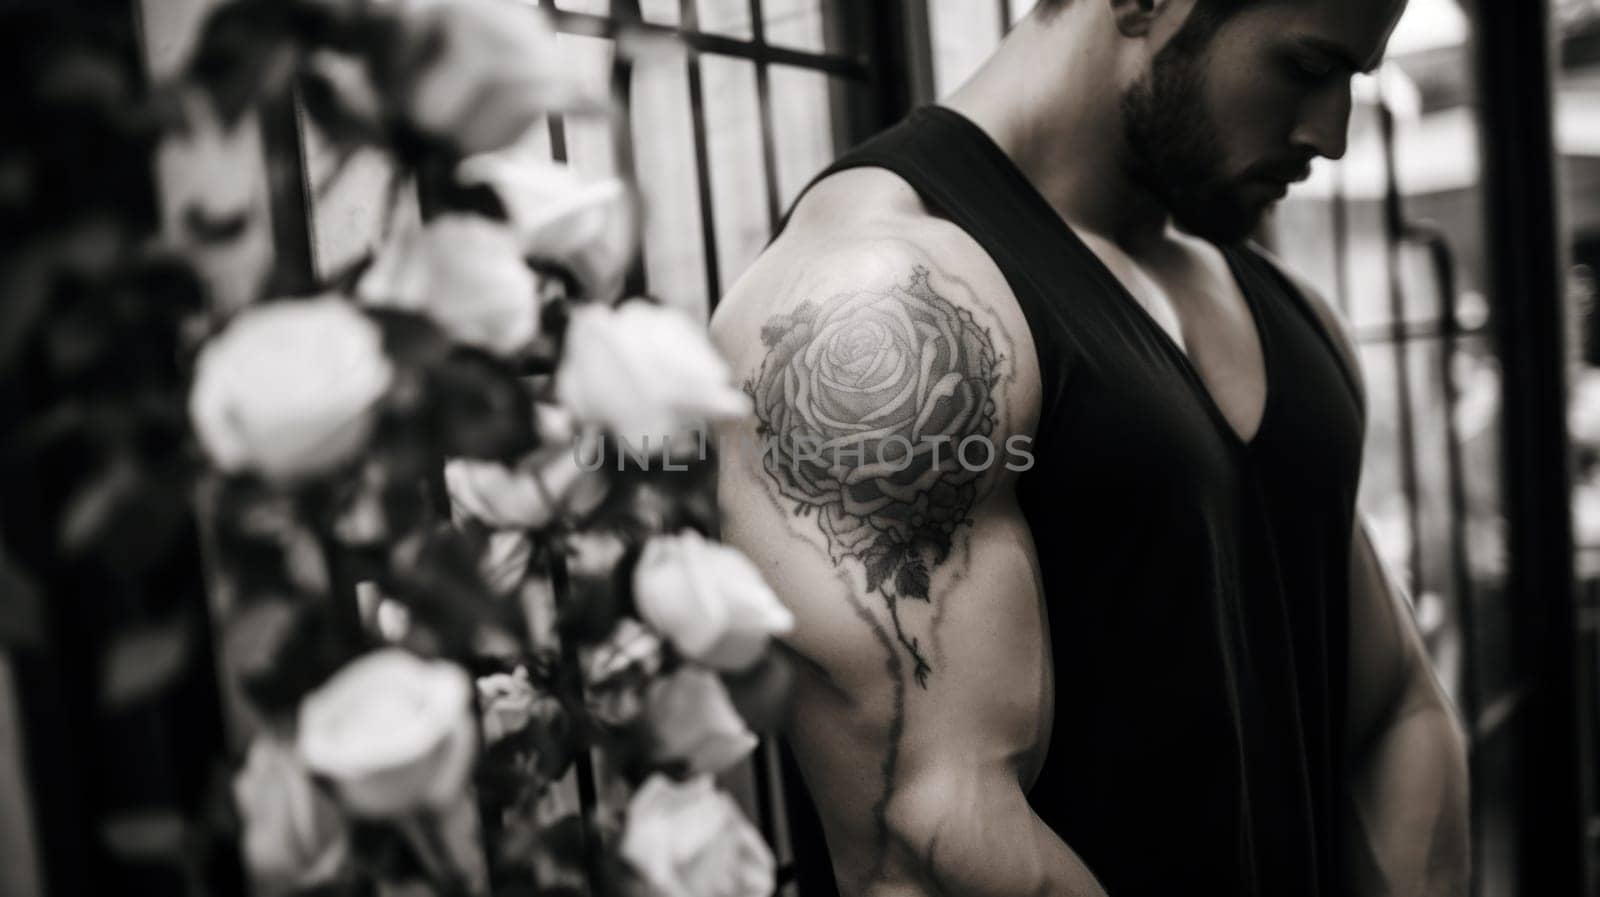 A man with a rose tattoo on his arm, AI by starush